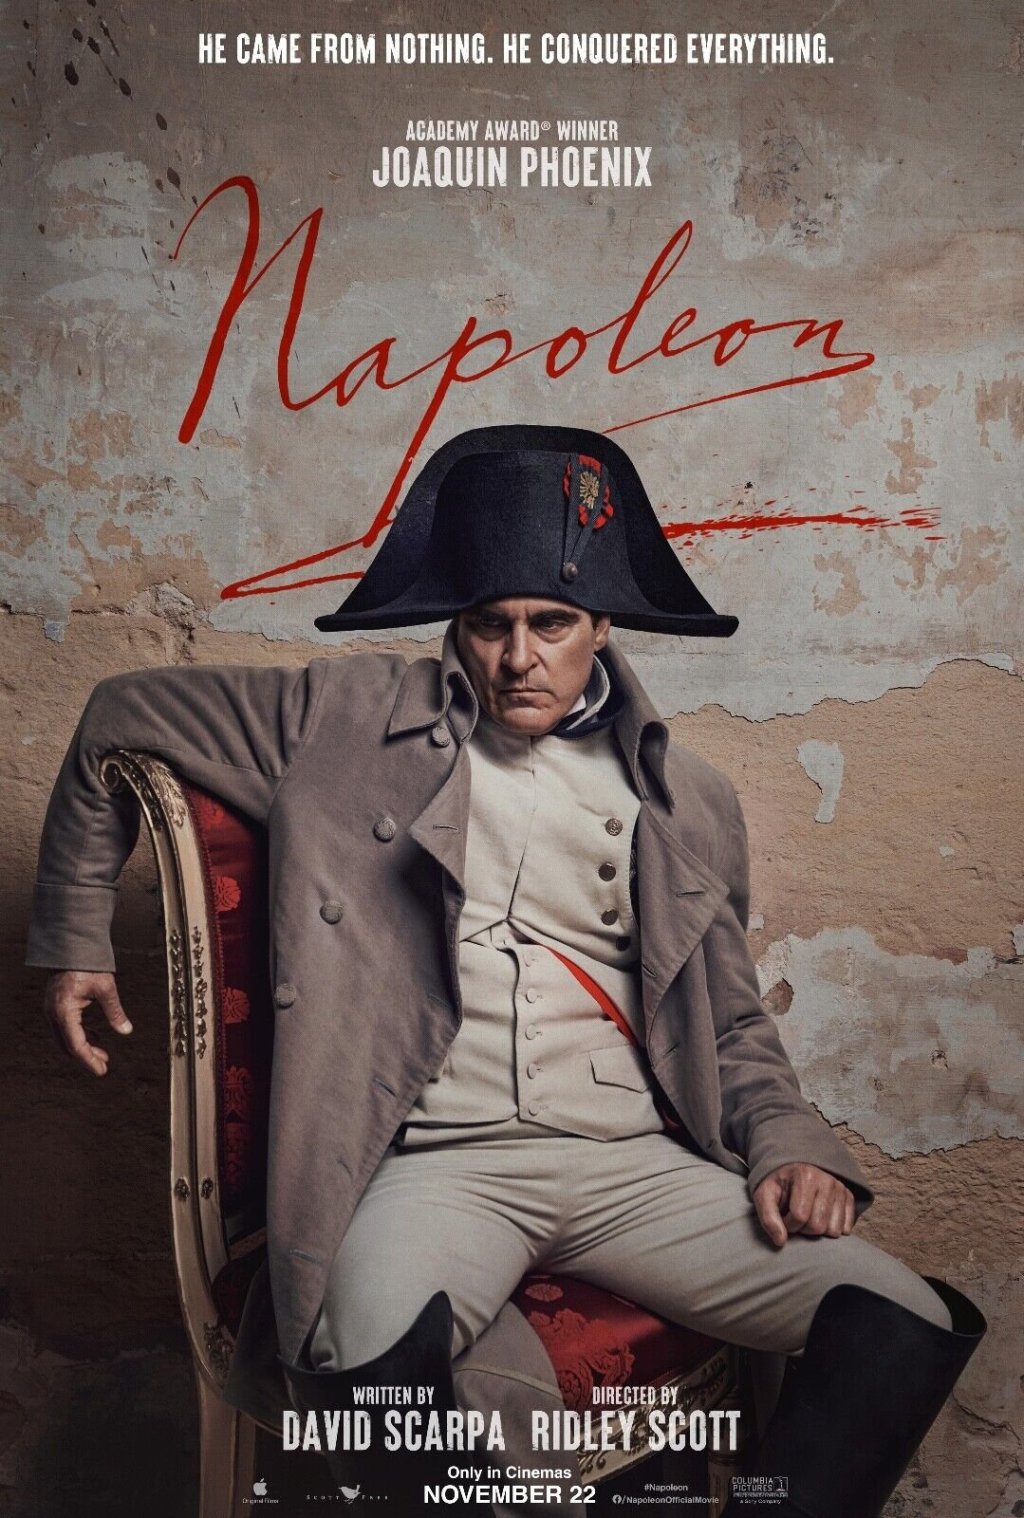 “Napoleon” Review: The Emperor Puts the Crown of France on his head once more